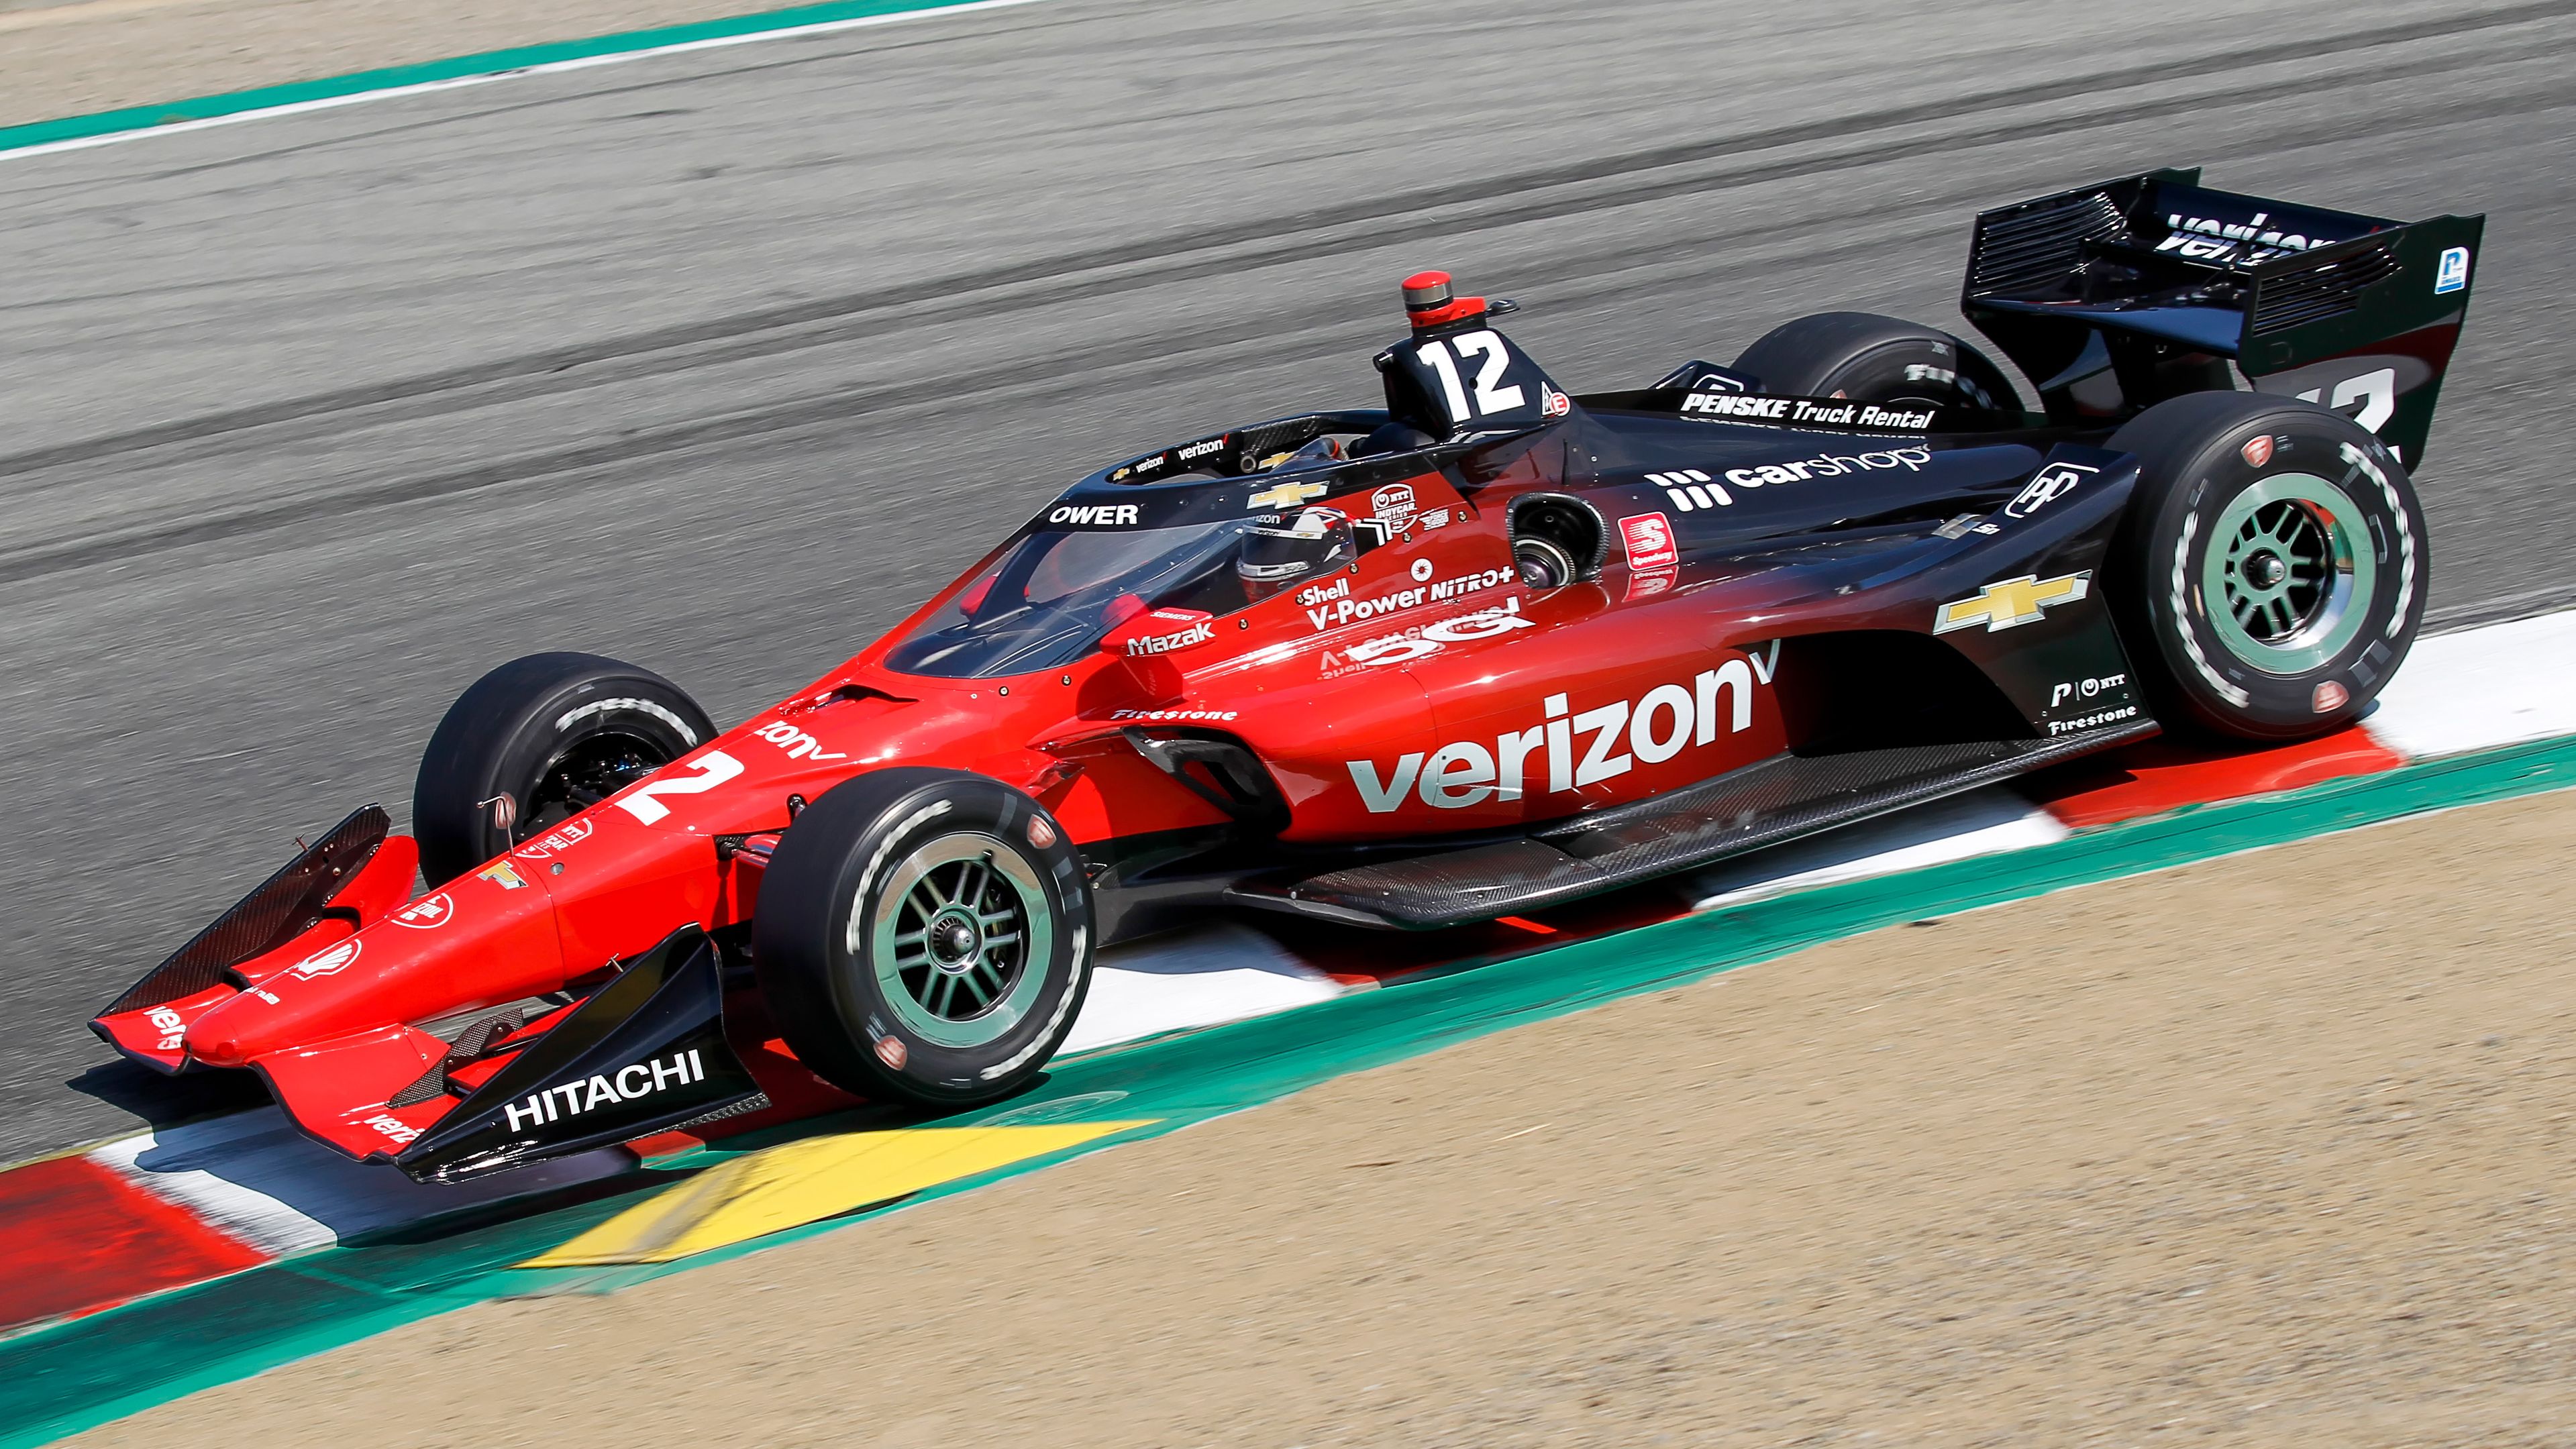 Will Power (#12 Verizon-Chevrolet for Team Penske) looks to enter the Corkscrew during practice for the IndyCar - Firestone Grand Prix of Monterey on September 9, 2022 at WeatherTech Raceway Laguna Seca in Salinas, CA. (Photo by Larry Placido/Icon Sportswire via Getty Images)